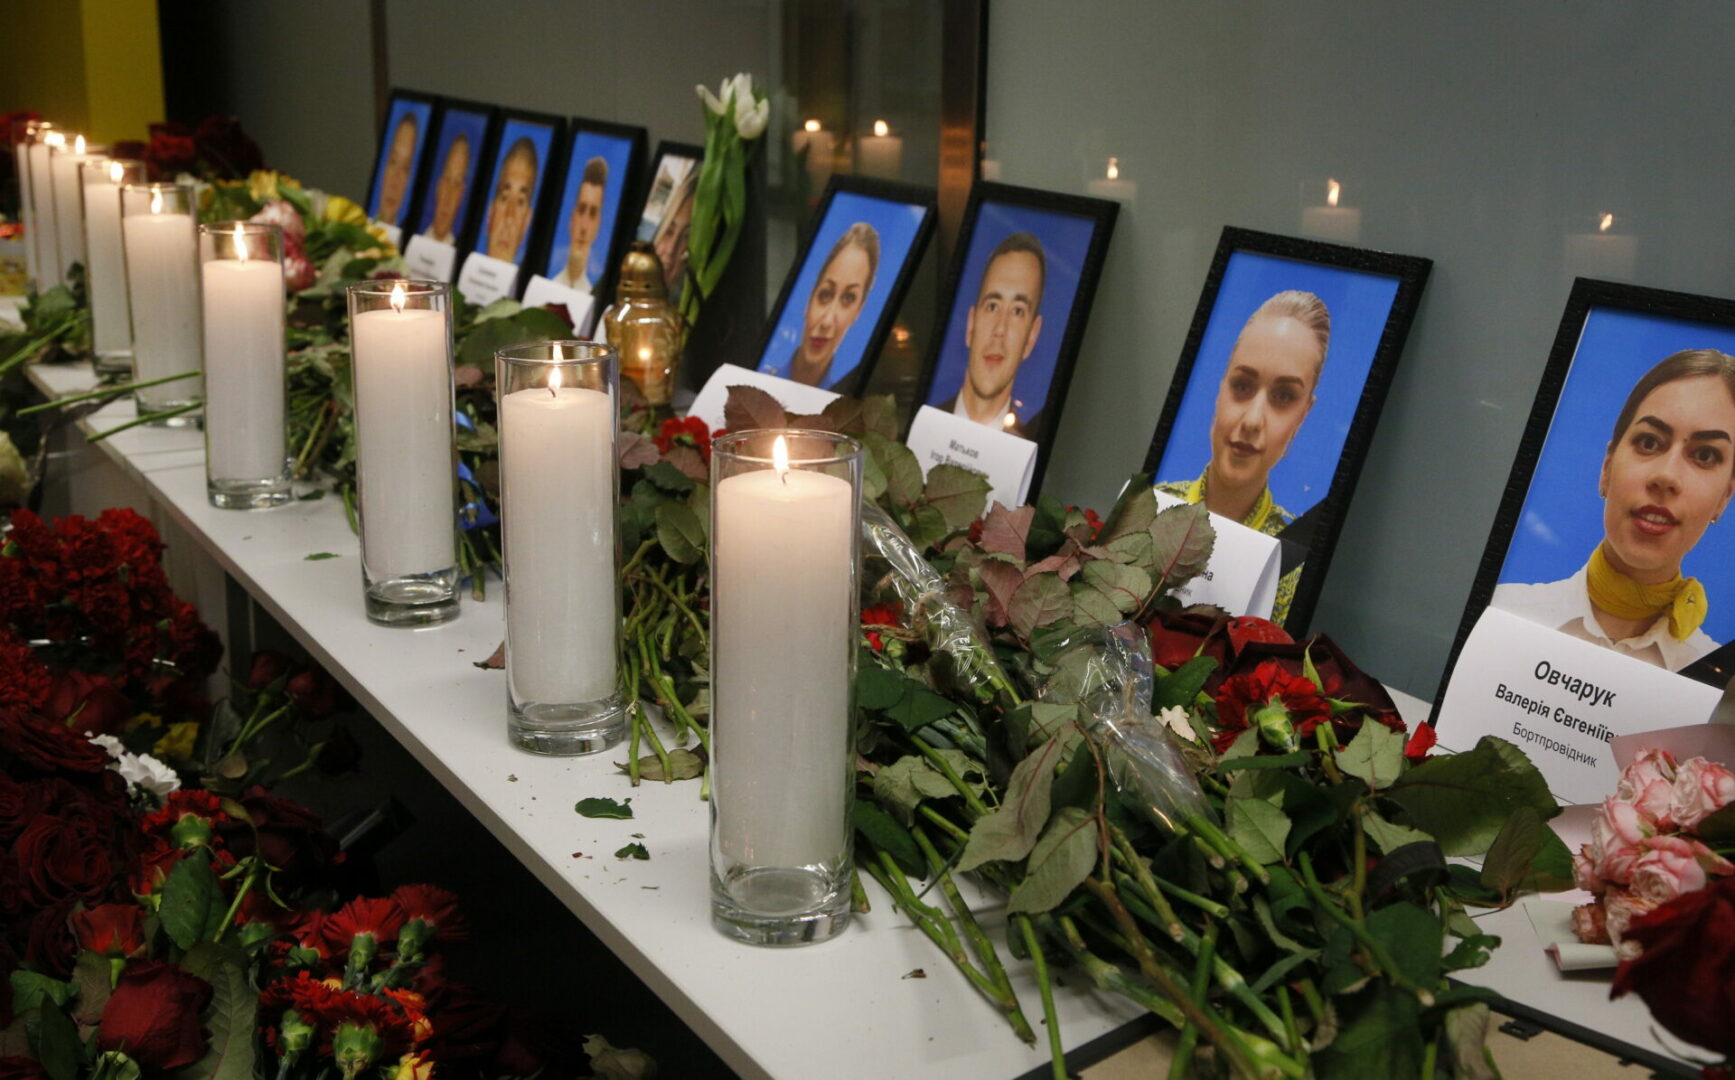 Flowers and candles are placed in front of portraits of the flight crew members of the Ukrainian 737-800 plane that crashed on the outskirts of Tehran, at a memorial inside Borispil international airport outside Kyiv, Ukraine, Wednesday, Jan. 8, 2020. A Ukrainian airplane carrying 176 people crashed on Wednesday shortly after takeoff from Tehran's main airport, killing all onboard, Iranian state TV and officials in Ukraine said. (AP Photo/Efrem Lukatsky)